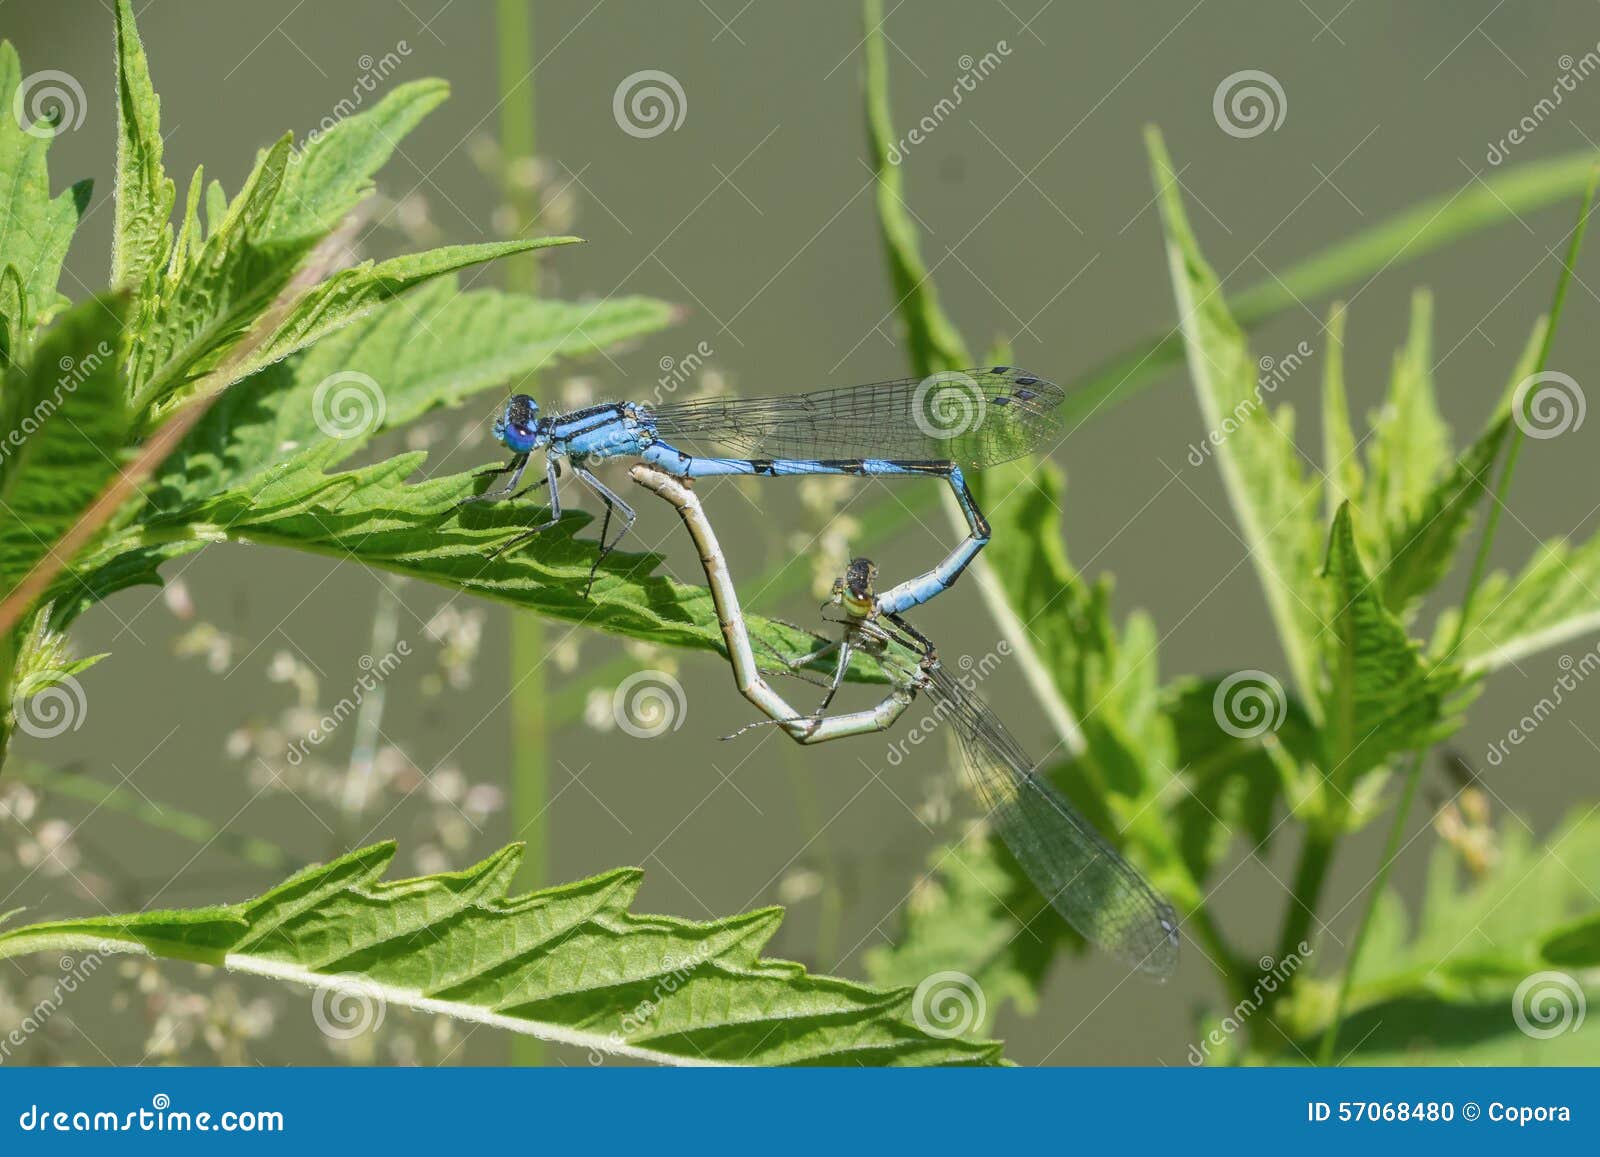 Blue mating dragonflies sitting in the grass near a pond